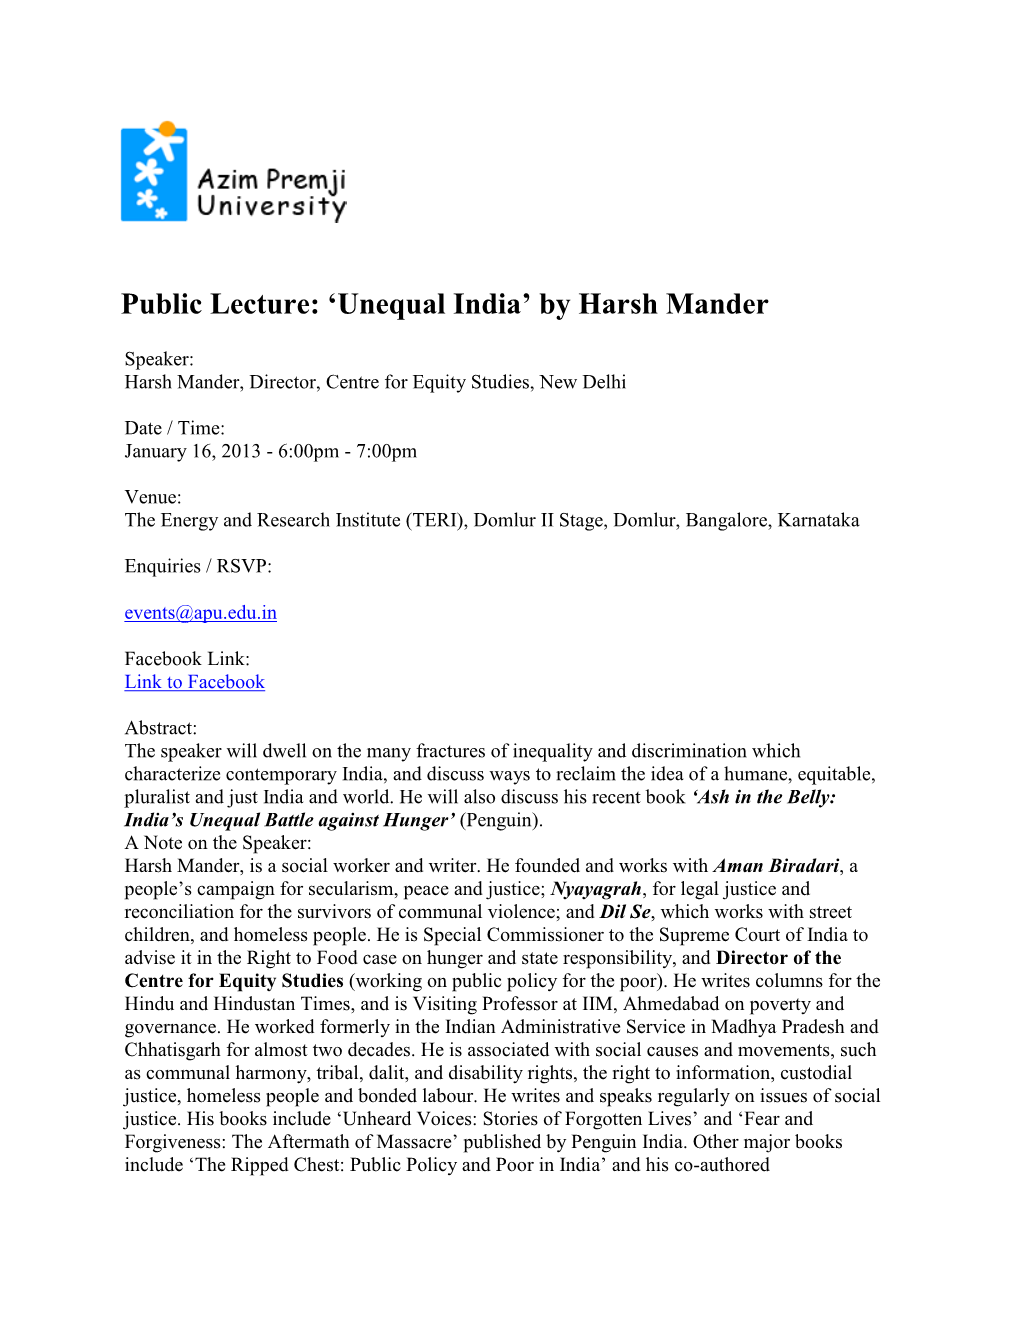 Public Lecture: 'Unequal India' by Harsh Mander